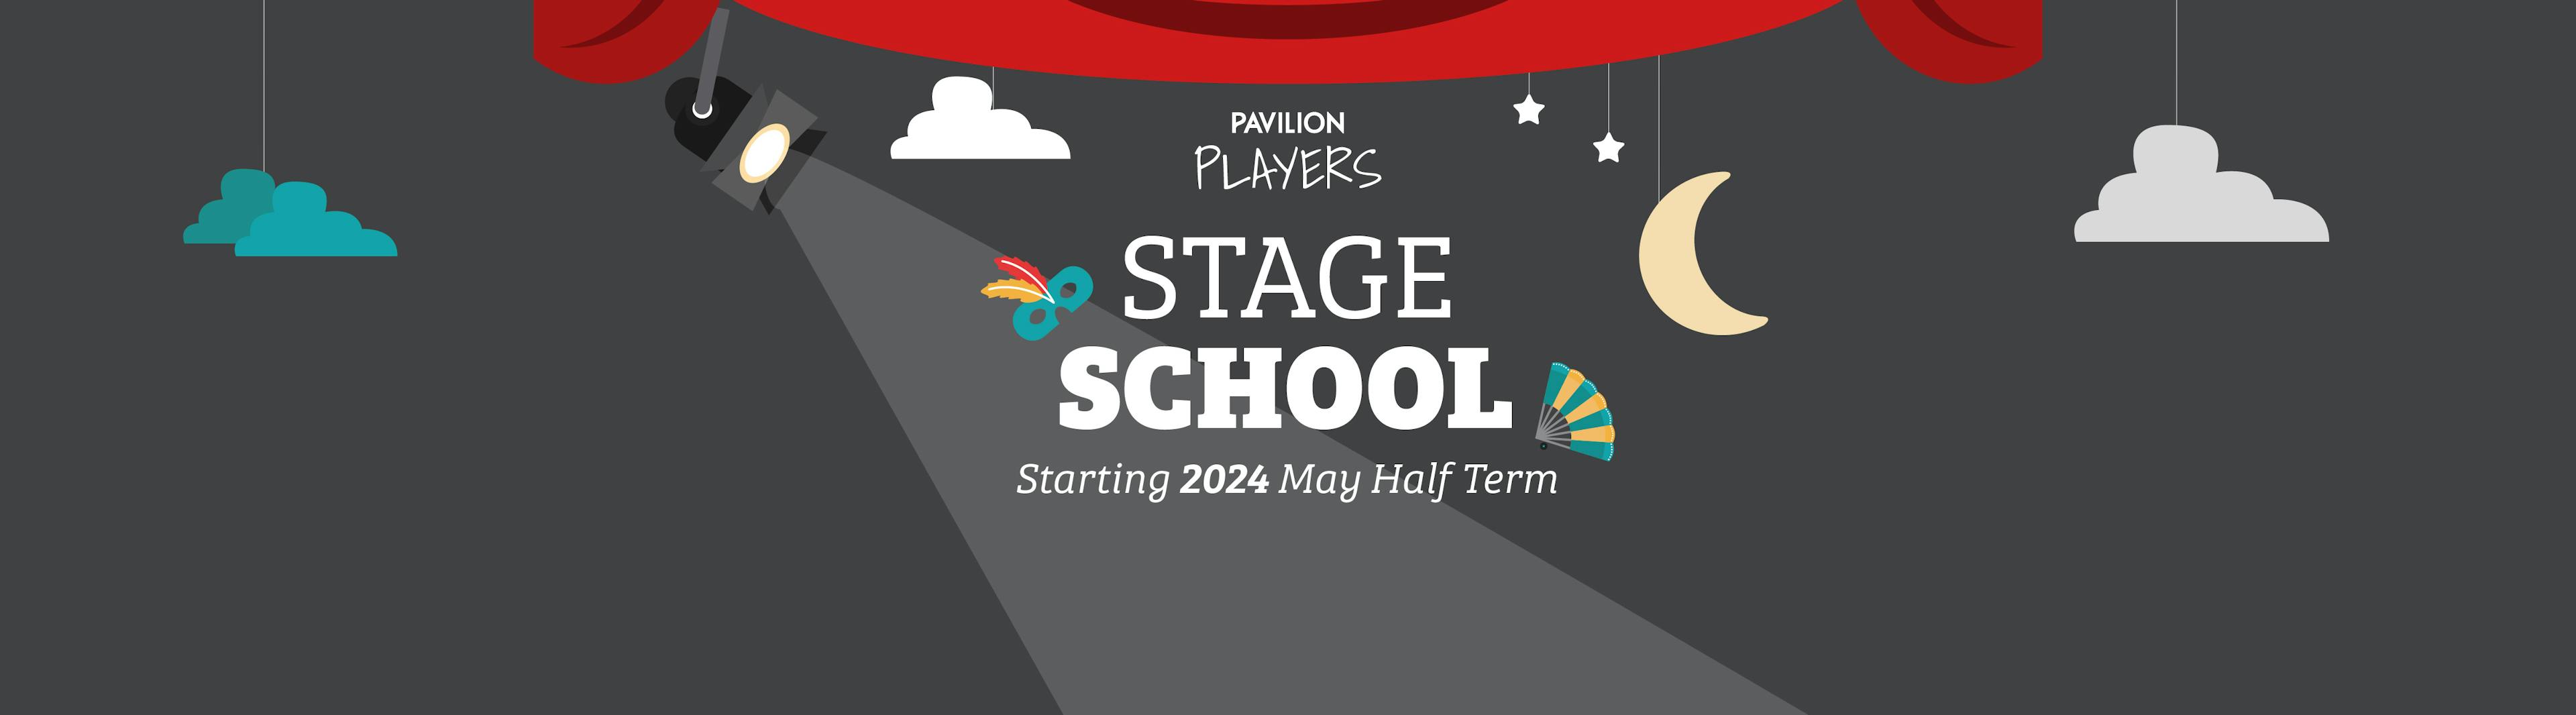 Logo for the Pavilion Players Stage School